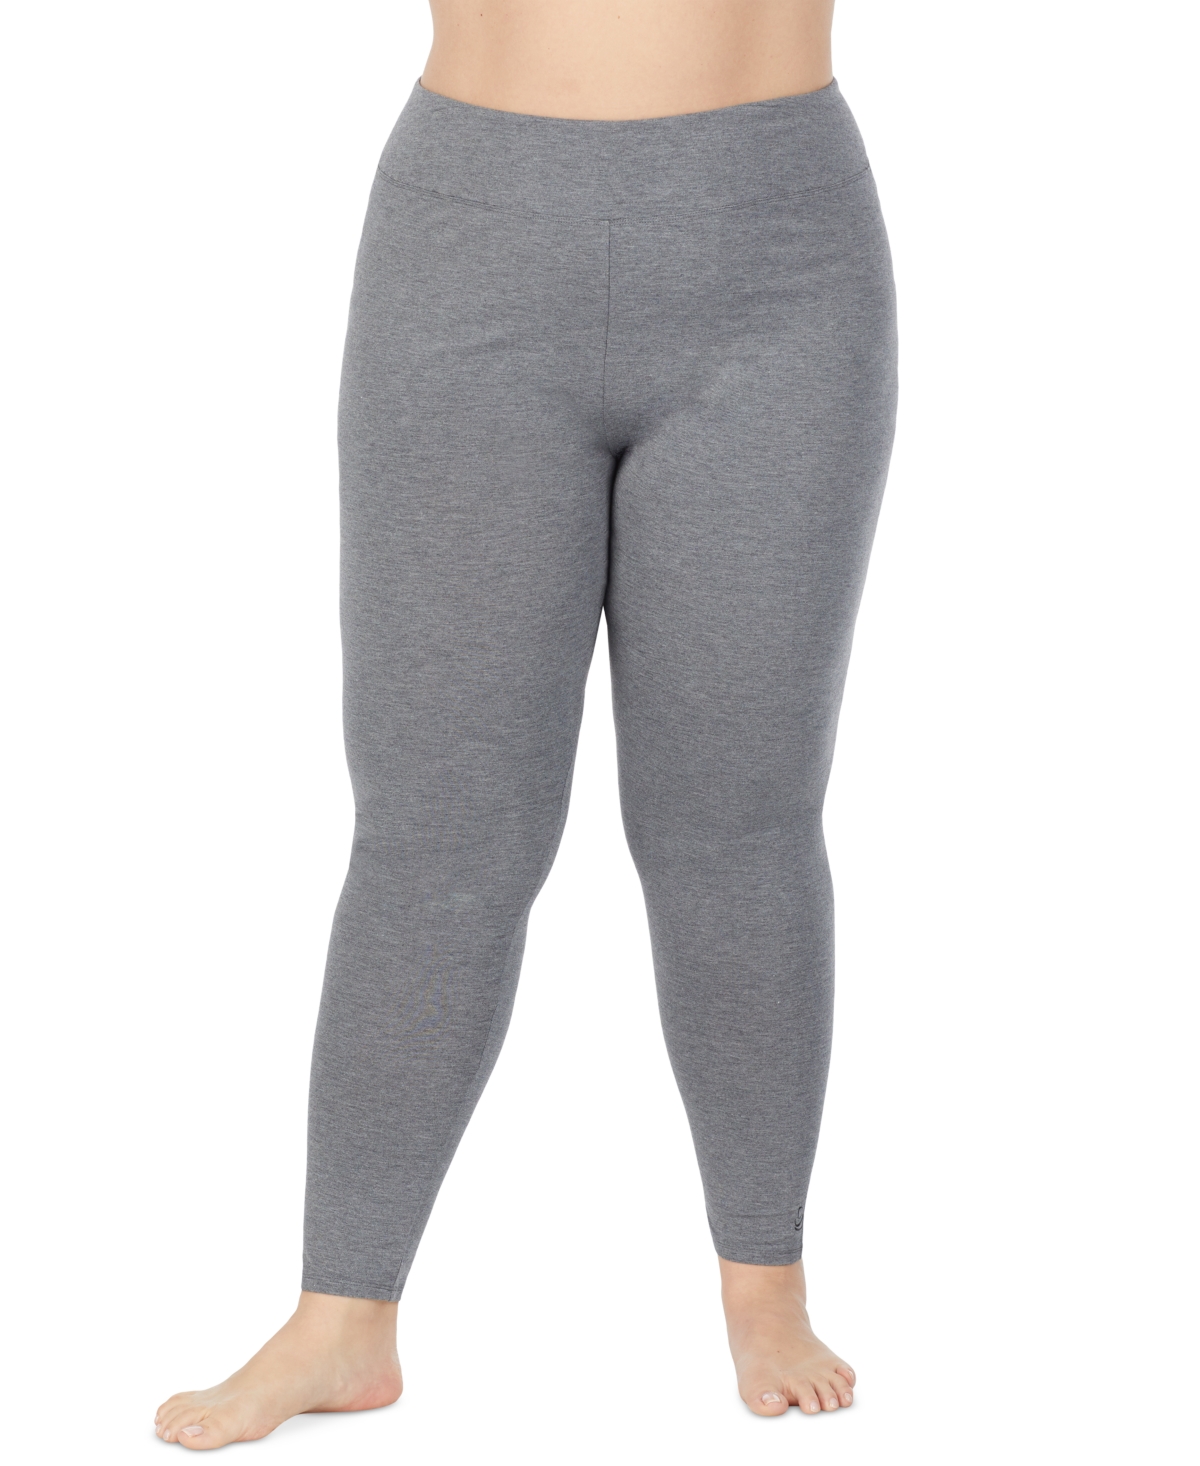 Plus Size Softwear with Stretch High-Waist Leggings - Charcoal